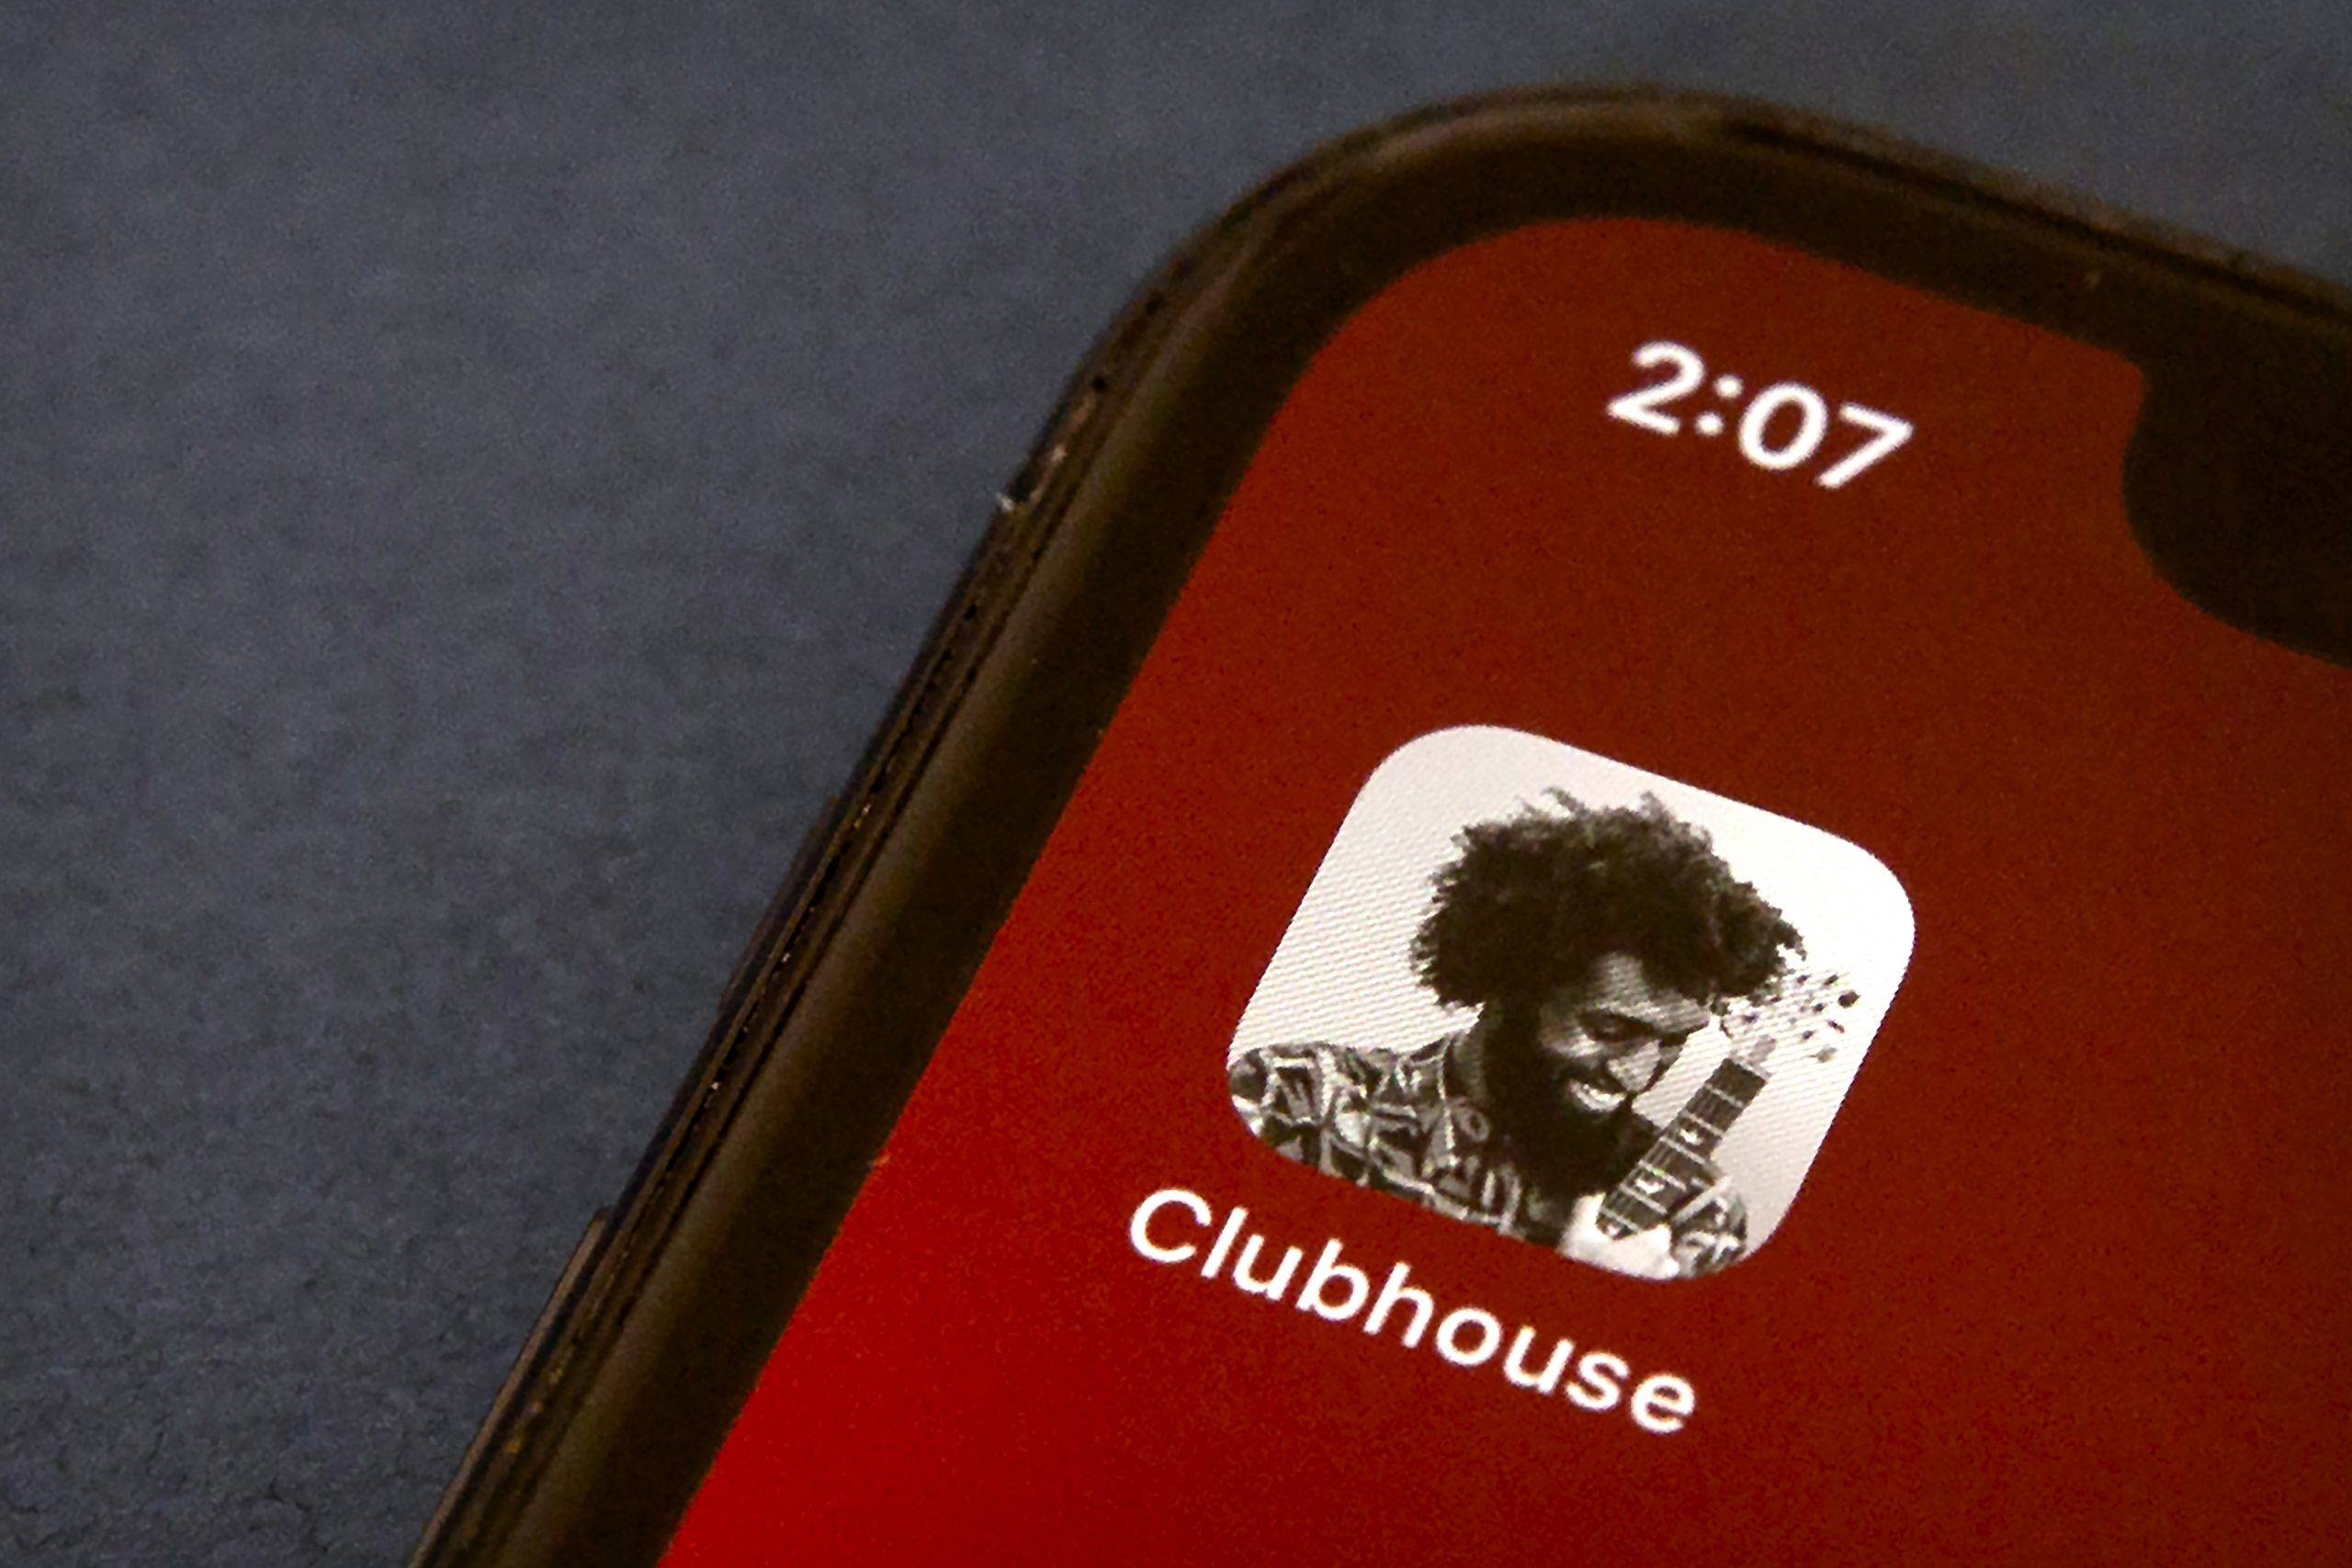 Why China is afraid of the Clubhouse app